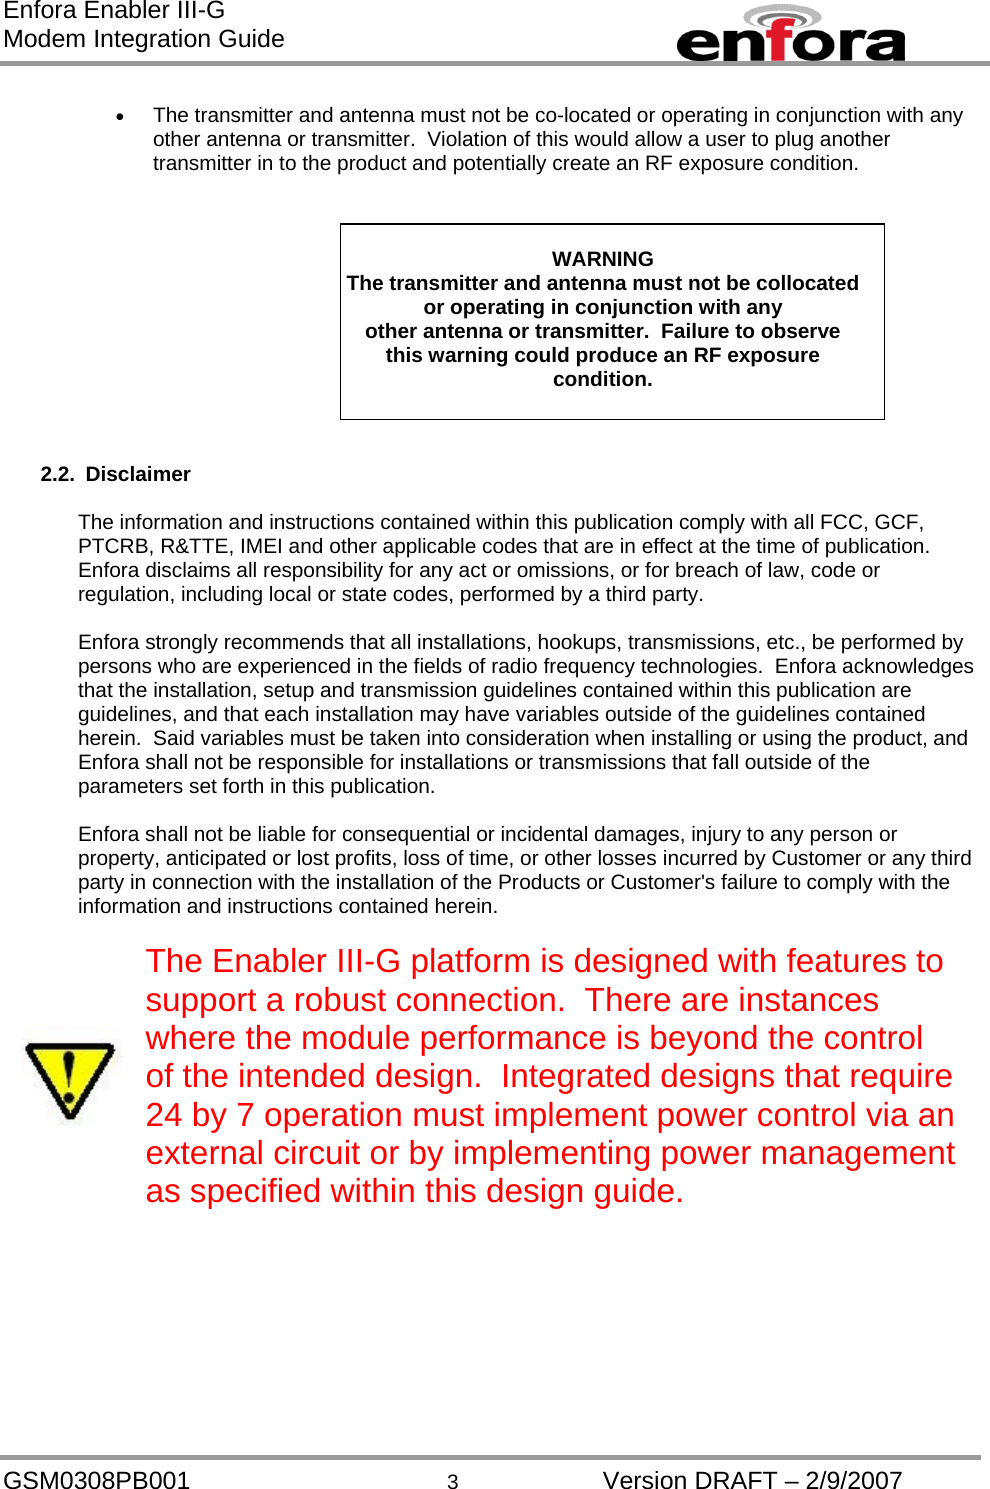 Enfora Enabler III-G Modem Integration Guide  •  The transmitter and antenna must not be co-located or operating in conjunction with any other antenna or transmitter.  Violation of this would allow a user to plug another transmitter in to the product and potentially create an RF exposure condition.    WARNING The transmitter and antenna must not be collocated or operating in conjunction with any other antenna or transmitter.  Failure to observe this warning could produce an RF exposure condition.    2.2. Disclaimer  The information and instructions contained within this publication comply with all FCC, GCF, PTCRB, R&amp;TTE, IMEI and other applicable codes that are in effect at the time of publication.  Enfora disclaims all responsibility for any act or omissions, or for breach of law, code or regulation, including local or state codes, performed by a third party.  Enfora strongly recommends that all installations, hookups, transmissions, etc., be performed by persons who are experienced in the fields of radio frequency technologies.  Enfora acknowledges that the installation, setup and transmission guidelines contained within this publication are guidelines, and that each installation may have variables outside of the guidelines contained herein.  Said variables must be taken into consideration when installing or using the product, and Enfora shall not be responsible for installations or transmissions that fall outside of the parameters set forth in this publication.  Enfora shall not be liable for consequential or incidental damages, injury to any person or property, anticipated or lost profits, loss of time, or other losses incurred by Customer or any third party in connection with the installation of the Products or Customer&apos;s failure to comply with the information and instructions contained herein.   The Enabler III-G platform is designed with features to support a robust connection.  There are instances where the module performance is beyond the control of the intended design.  Integrated designs that require 24 by 7 operation must implement power control via an external circuit or by implementing power management as specified within this design guide.     GSM0308PB001  3  Version DRAFT – 2/9/2007 